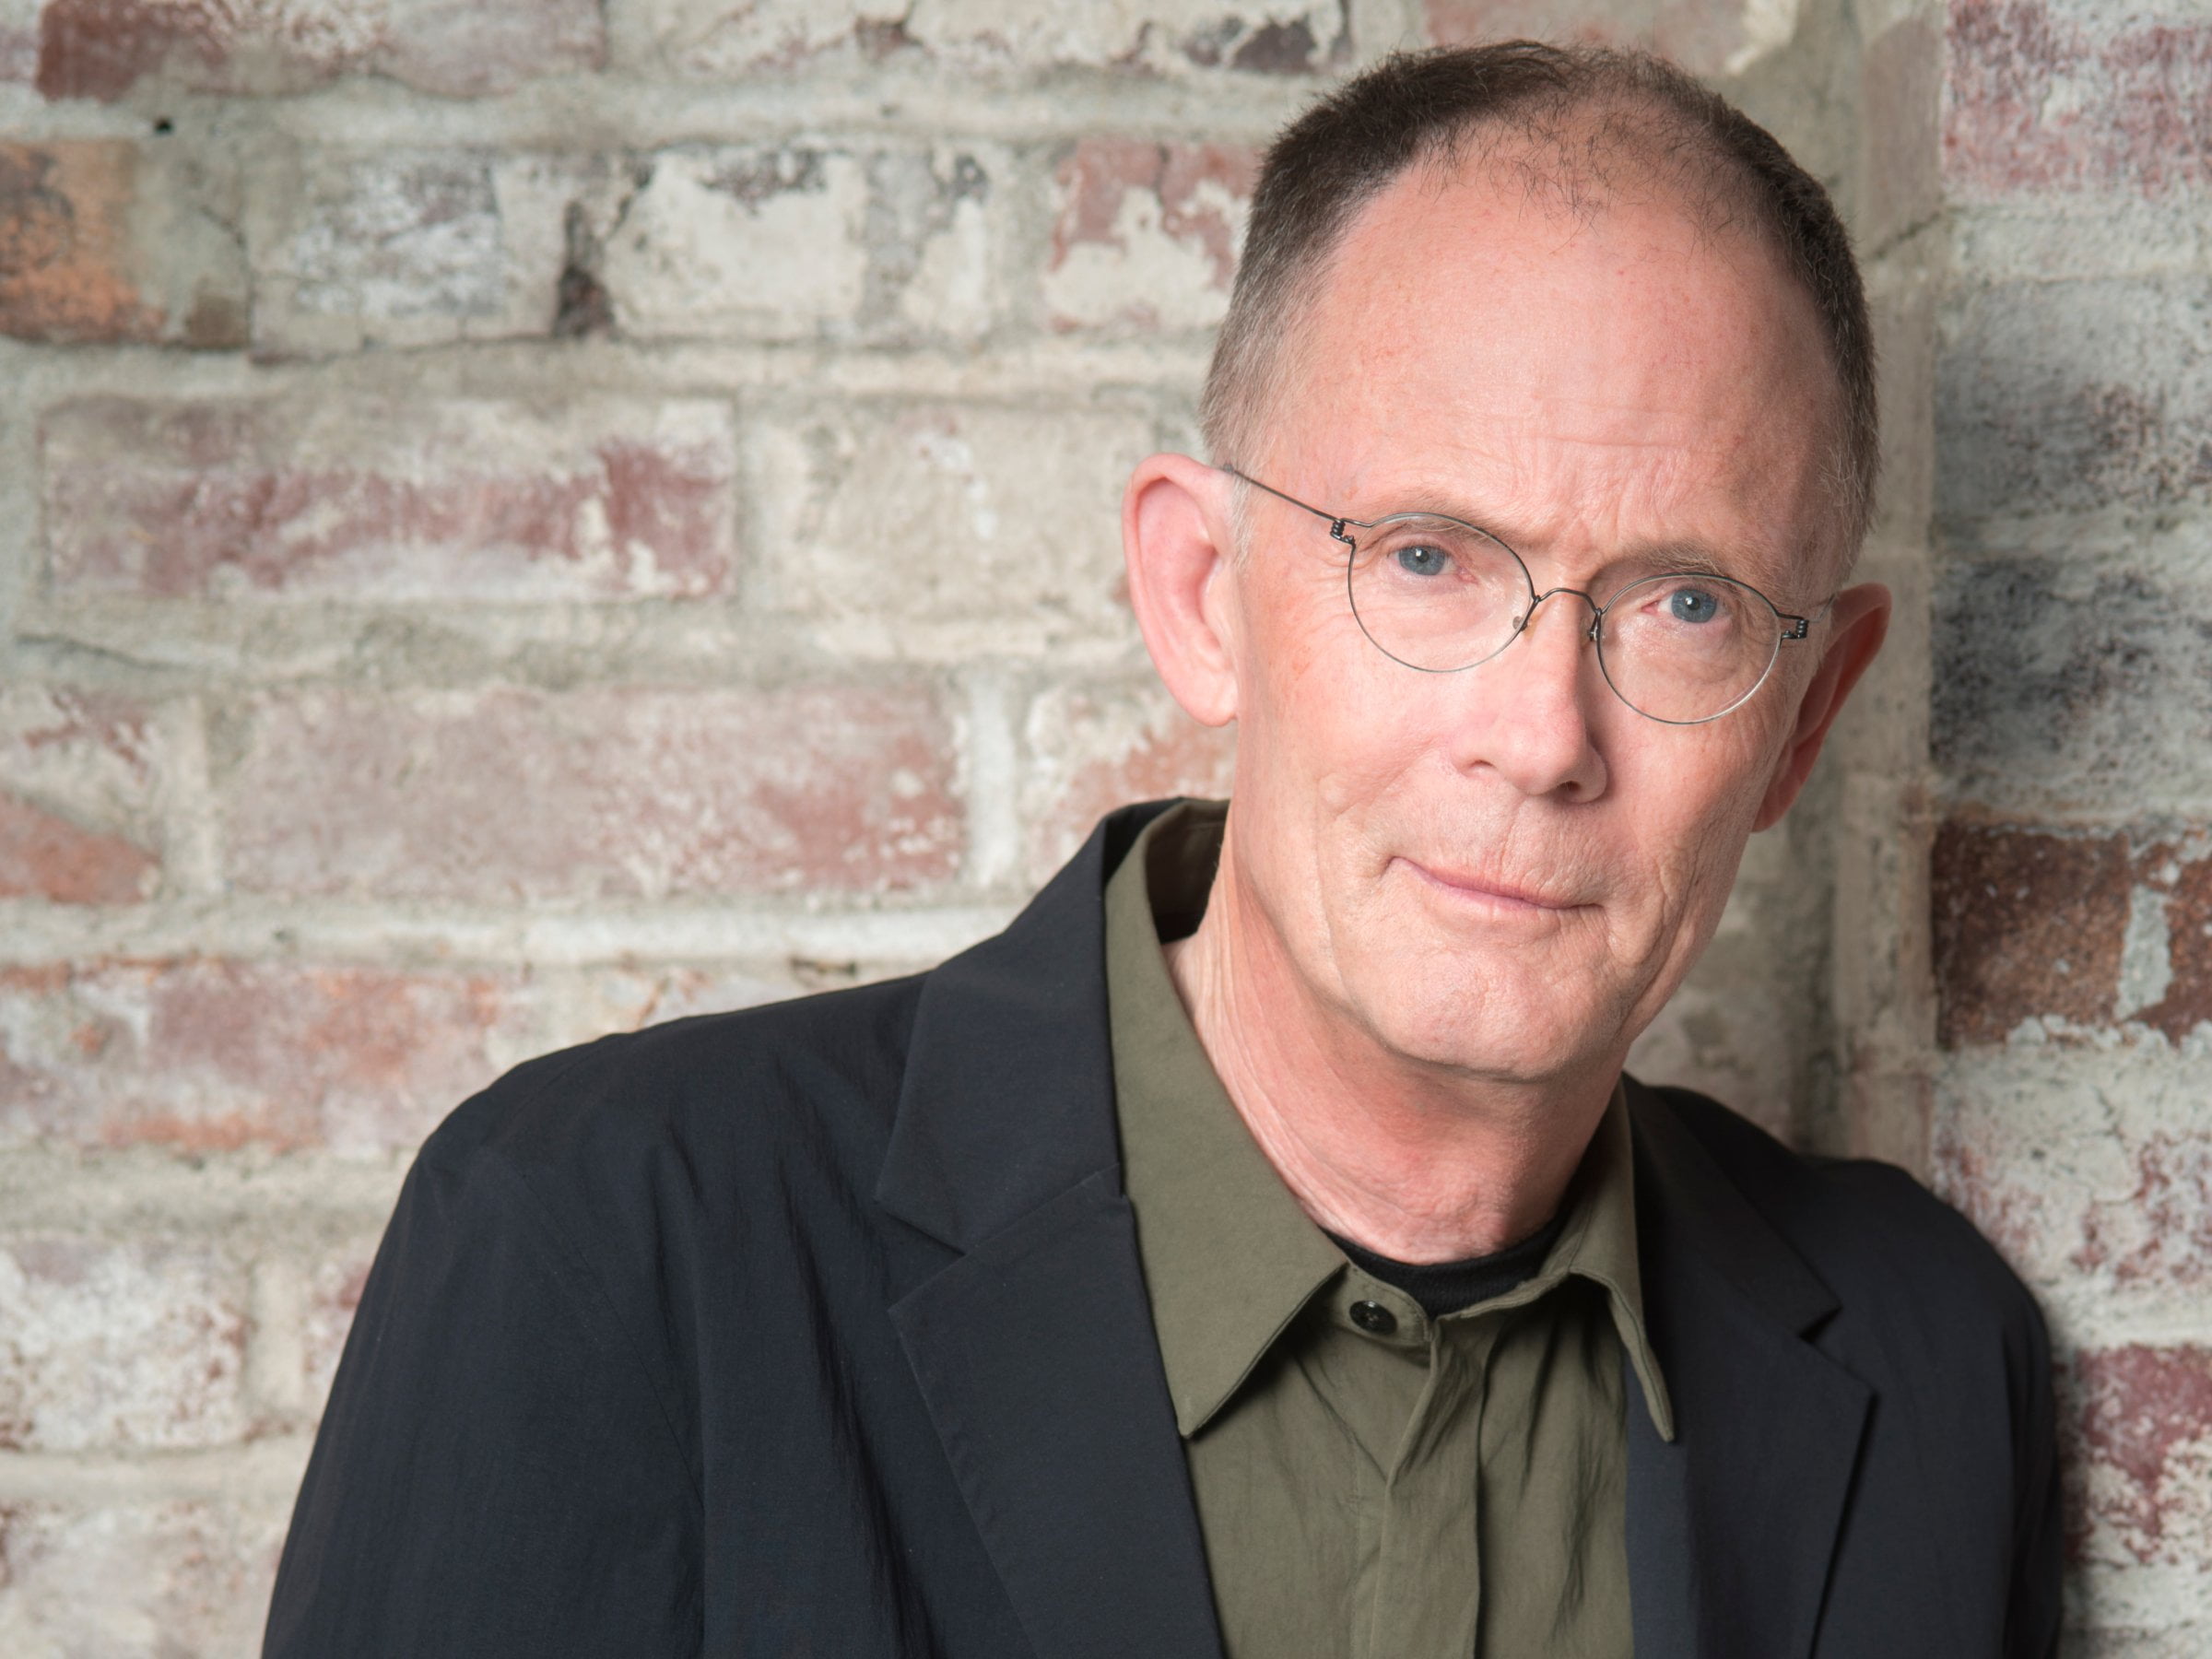 William Gibson talks about ‘The Peripheral,’ the power of Twitter, and his next book set in today’s Silicon Valley